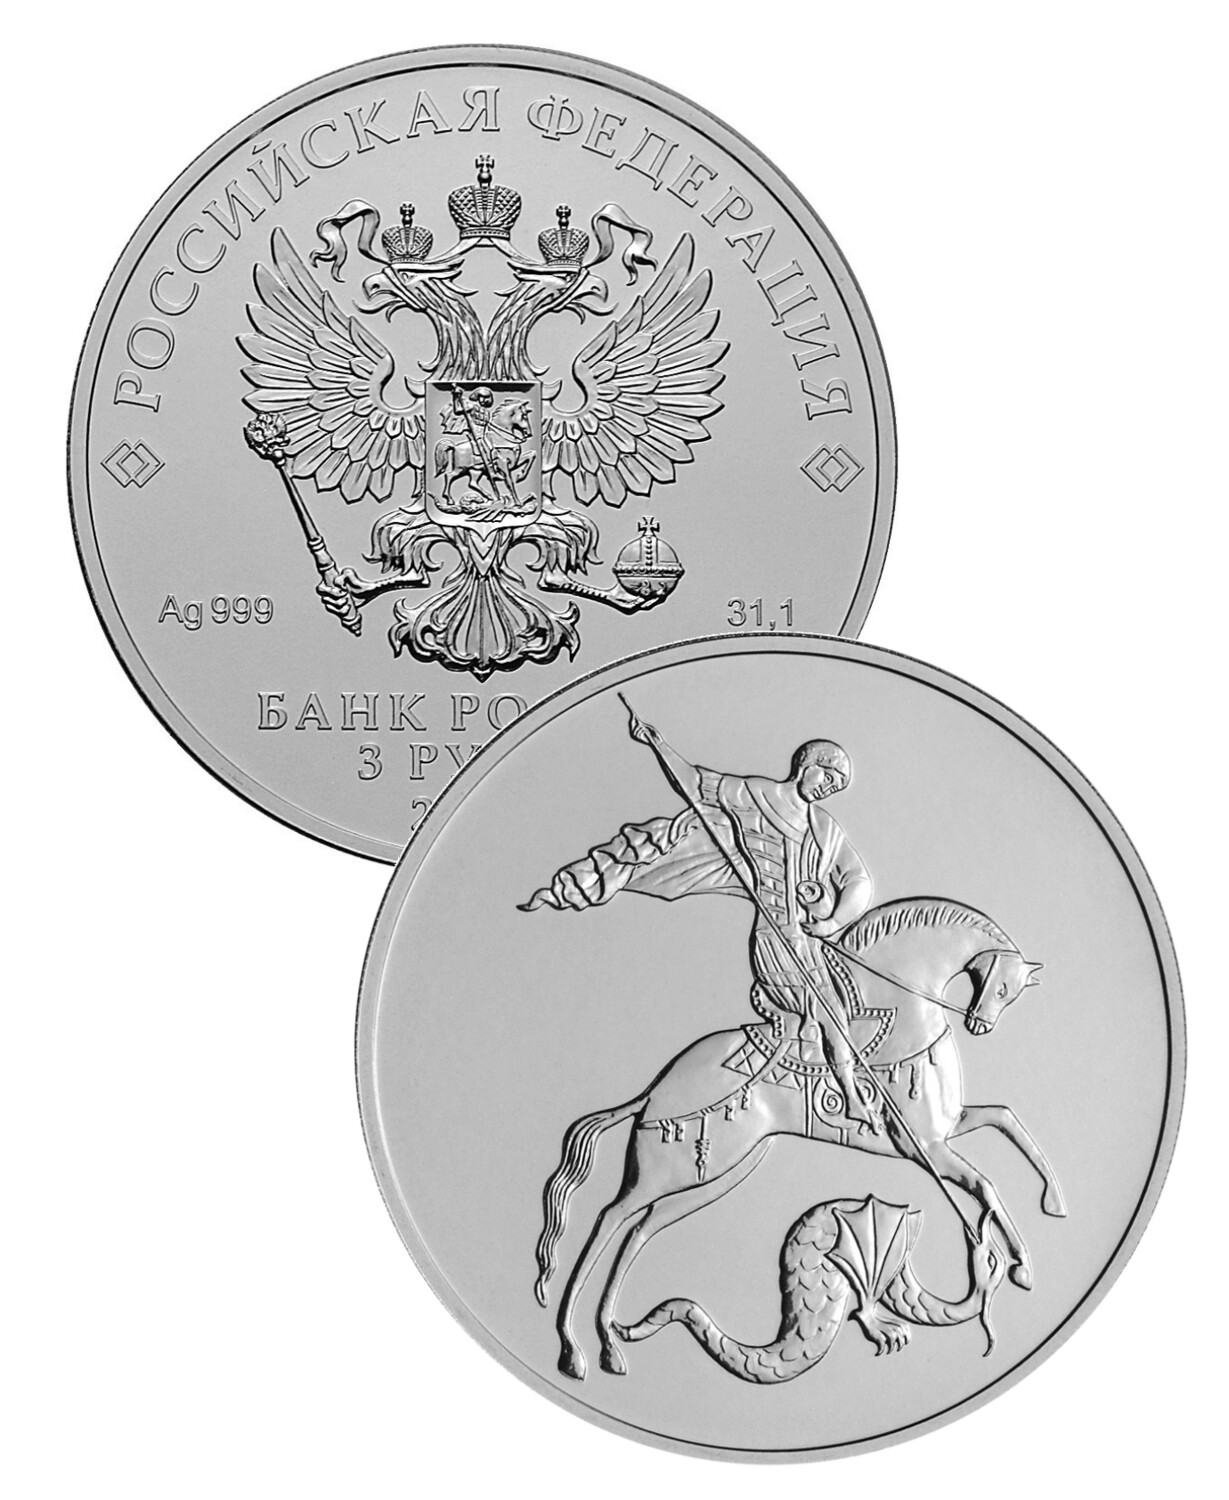 Russia. 2019. 3 Rubles. SPMD. George the Victorious. Silver 999. 1.0 Oz ASW 31.5 g. UNC Mintage: 100,000